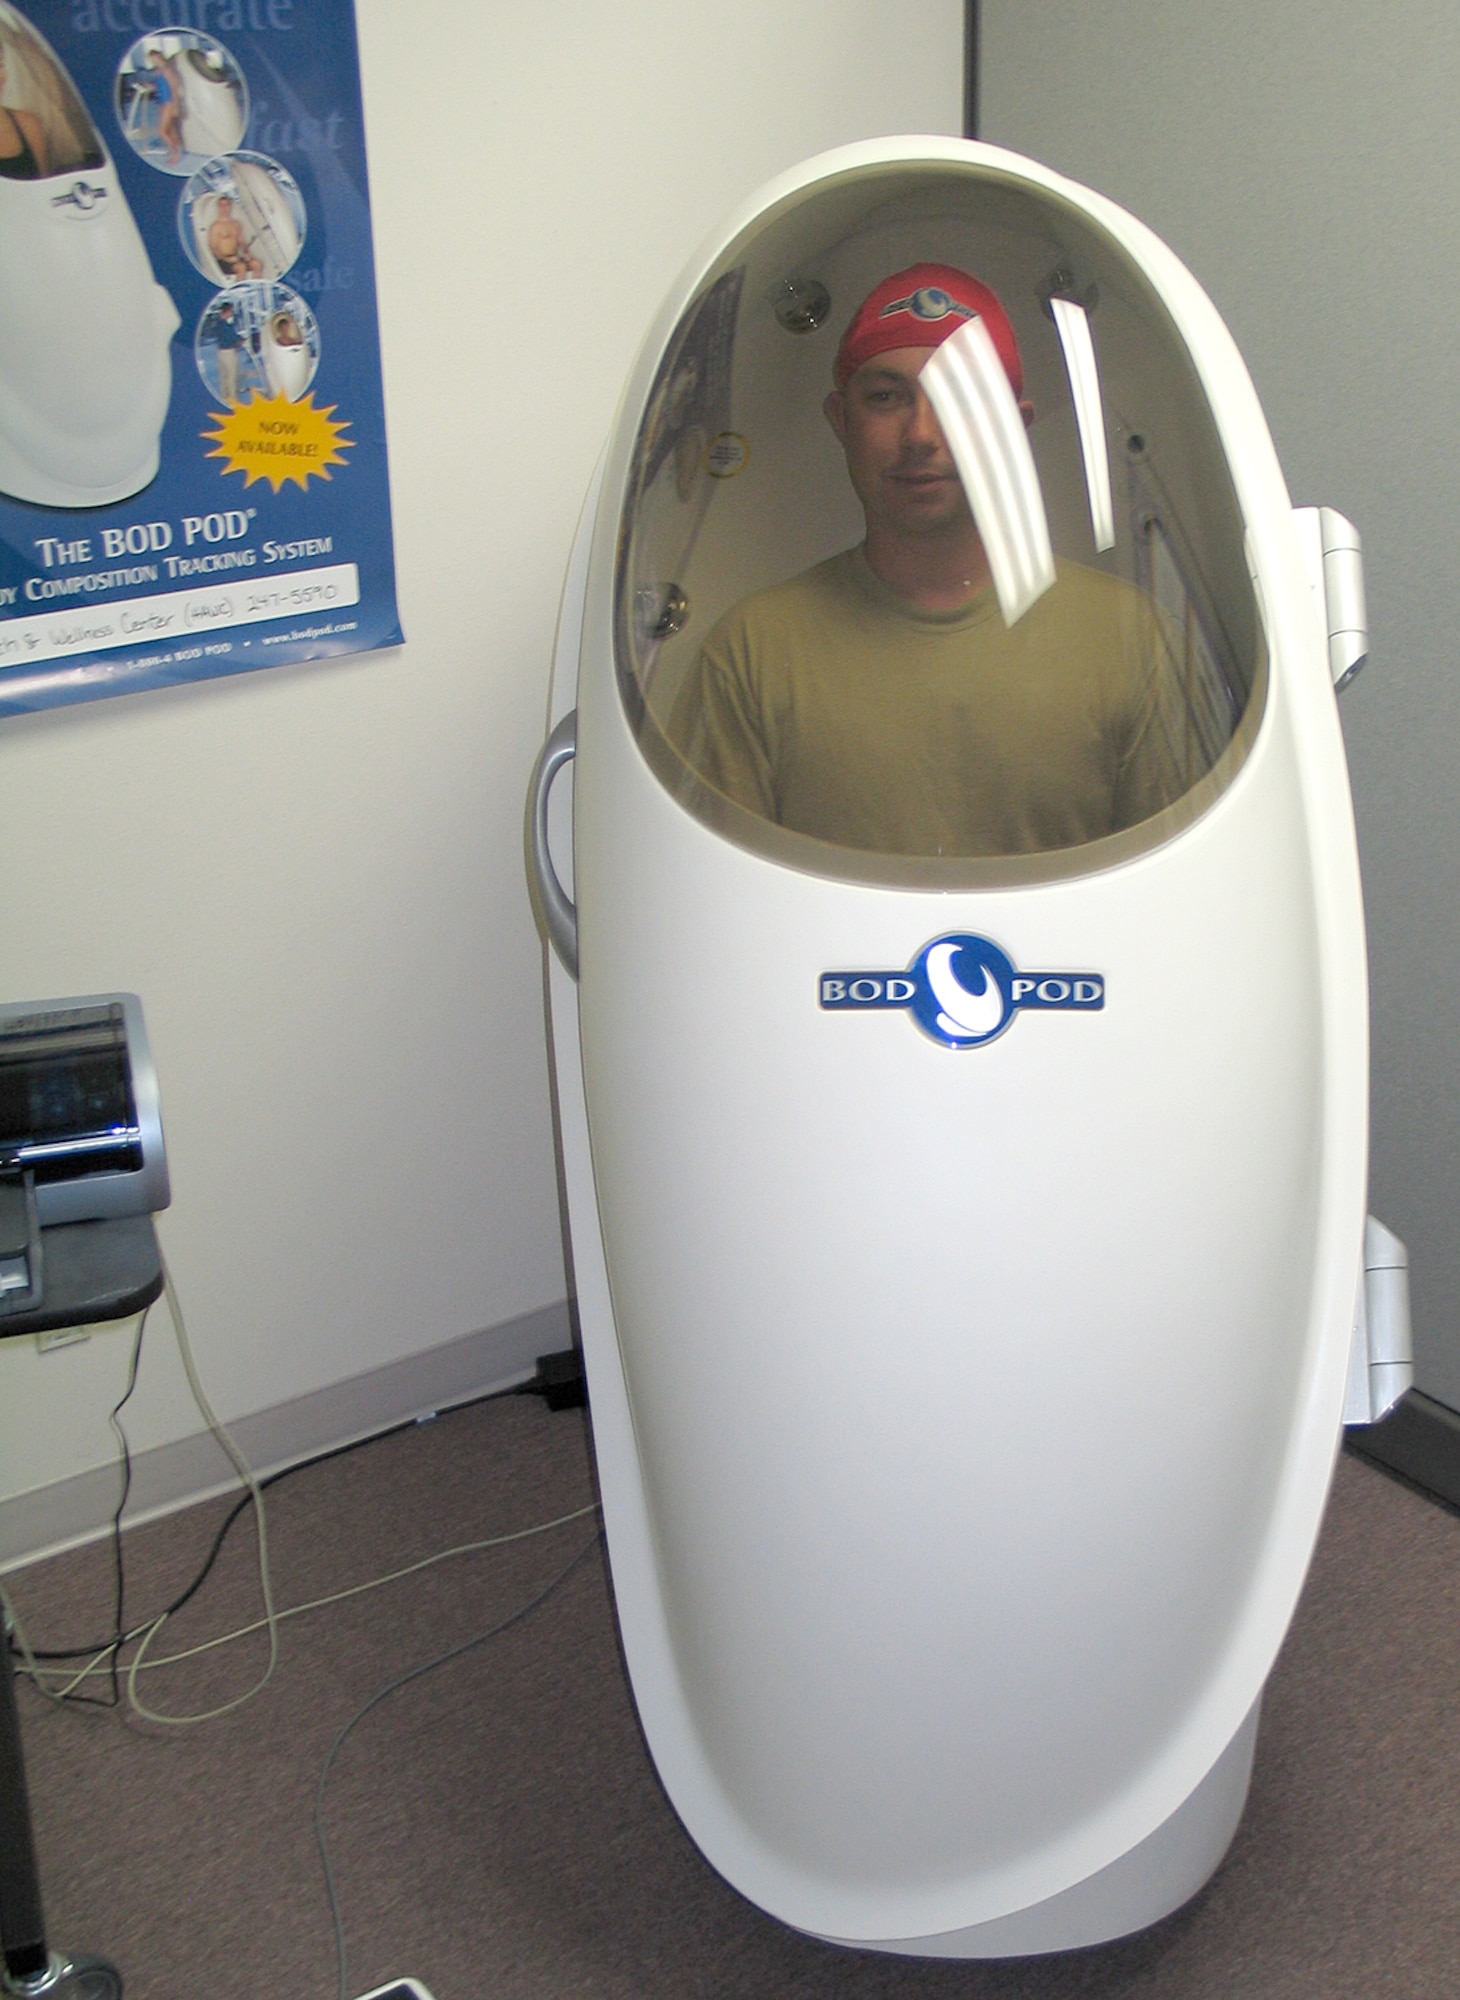 FAIRCHILD AIR FORCE BASE, Wash. – Staff Sgt. Mike Torrieri, health and wellness technician at the Health and Wellness Center here, demonstrates the Bod Pod Body Composition Tracking system, a machine that accurately measures a person’s body fat percentage. The body composition machine arrived at Fairchild in April, and has proven to be an efficient, accurate measurement device; the Pod measures body composition in 10 minutes or less. Though Fairchild is one of only 13 Air Force bases currently using the machine, Alyson Kresser, HAWC dietician, says she can “see the Bod Pod becoming more popular.” (U.S. Air Force photo / Staff Sgt. Connie L. Bias)